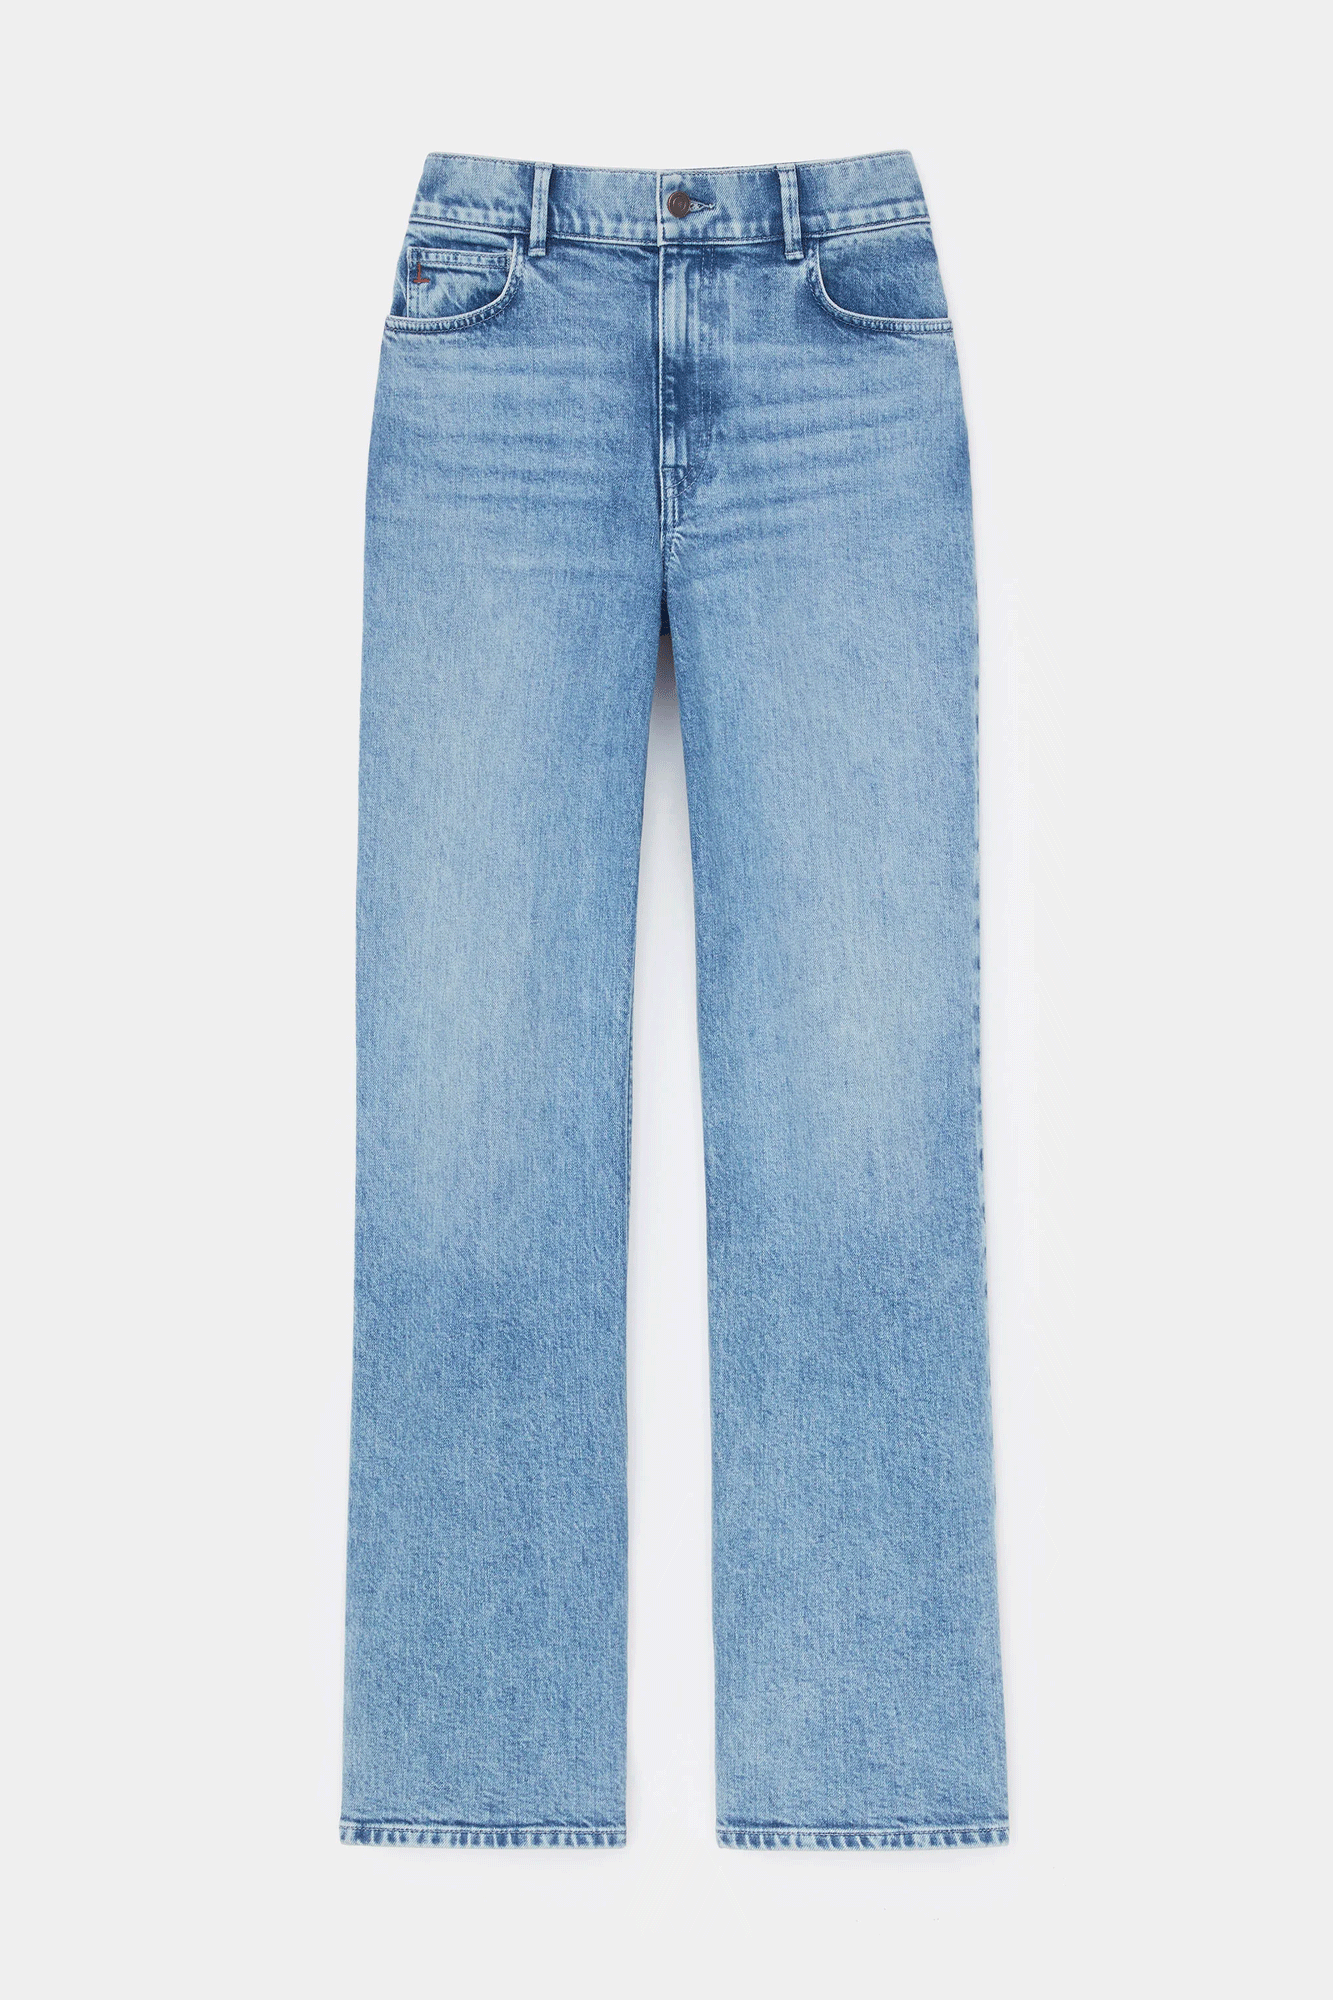 Introducing the York Jean from Lafayette 148: expertly crafted from signature Italian denim, the York Jean features a straight-cut, full leg and waist-defining high rise. Hand-finished with unique highs and lows, this jean is sustainably-sourced from a legendary USA mill, creating a one-of-a-kind garment.